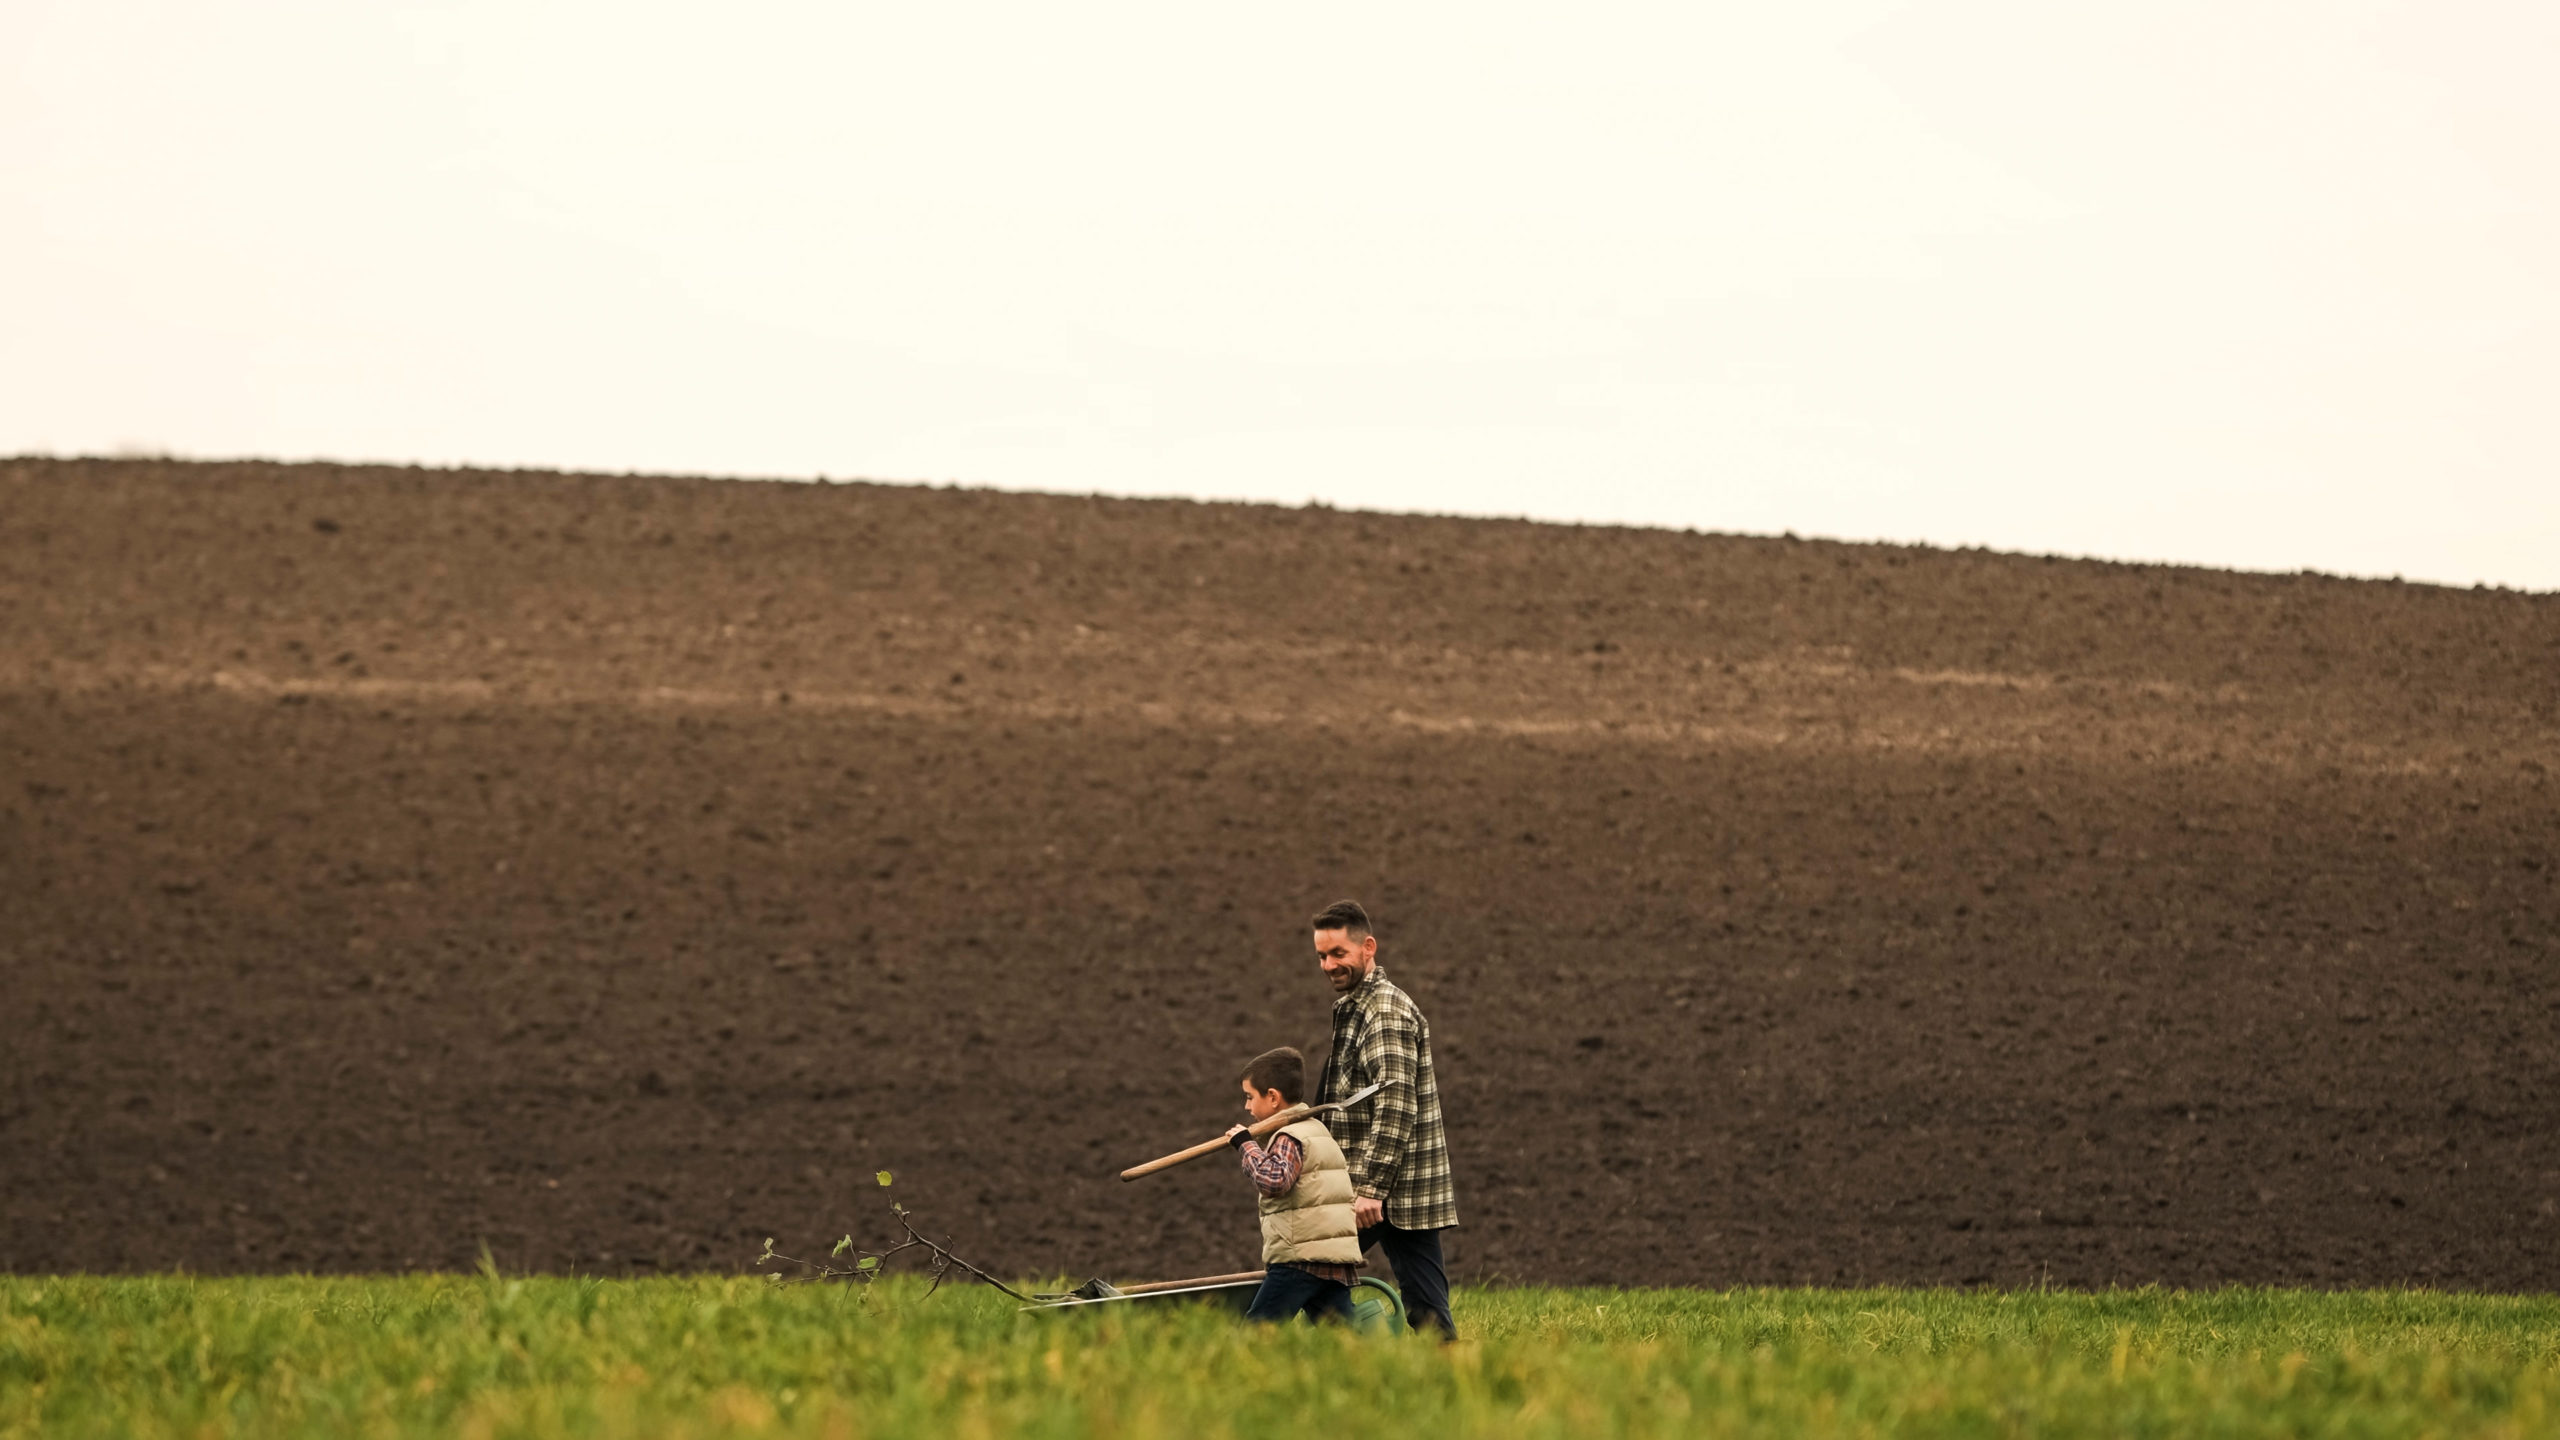 The father and son working in the field